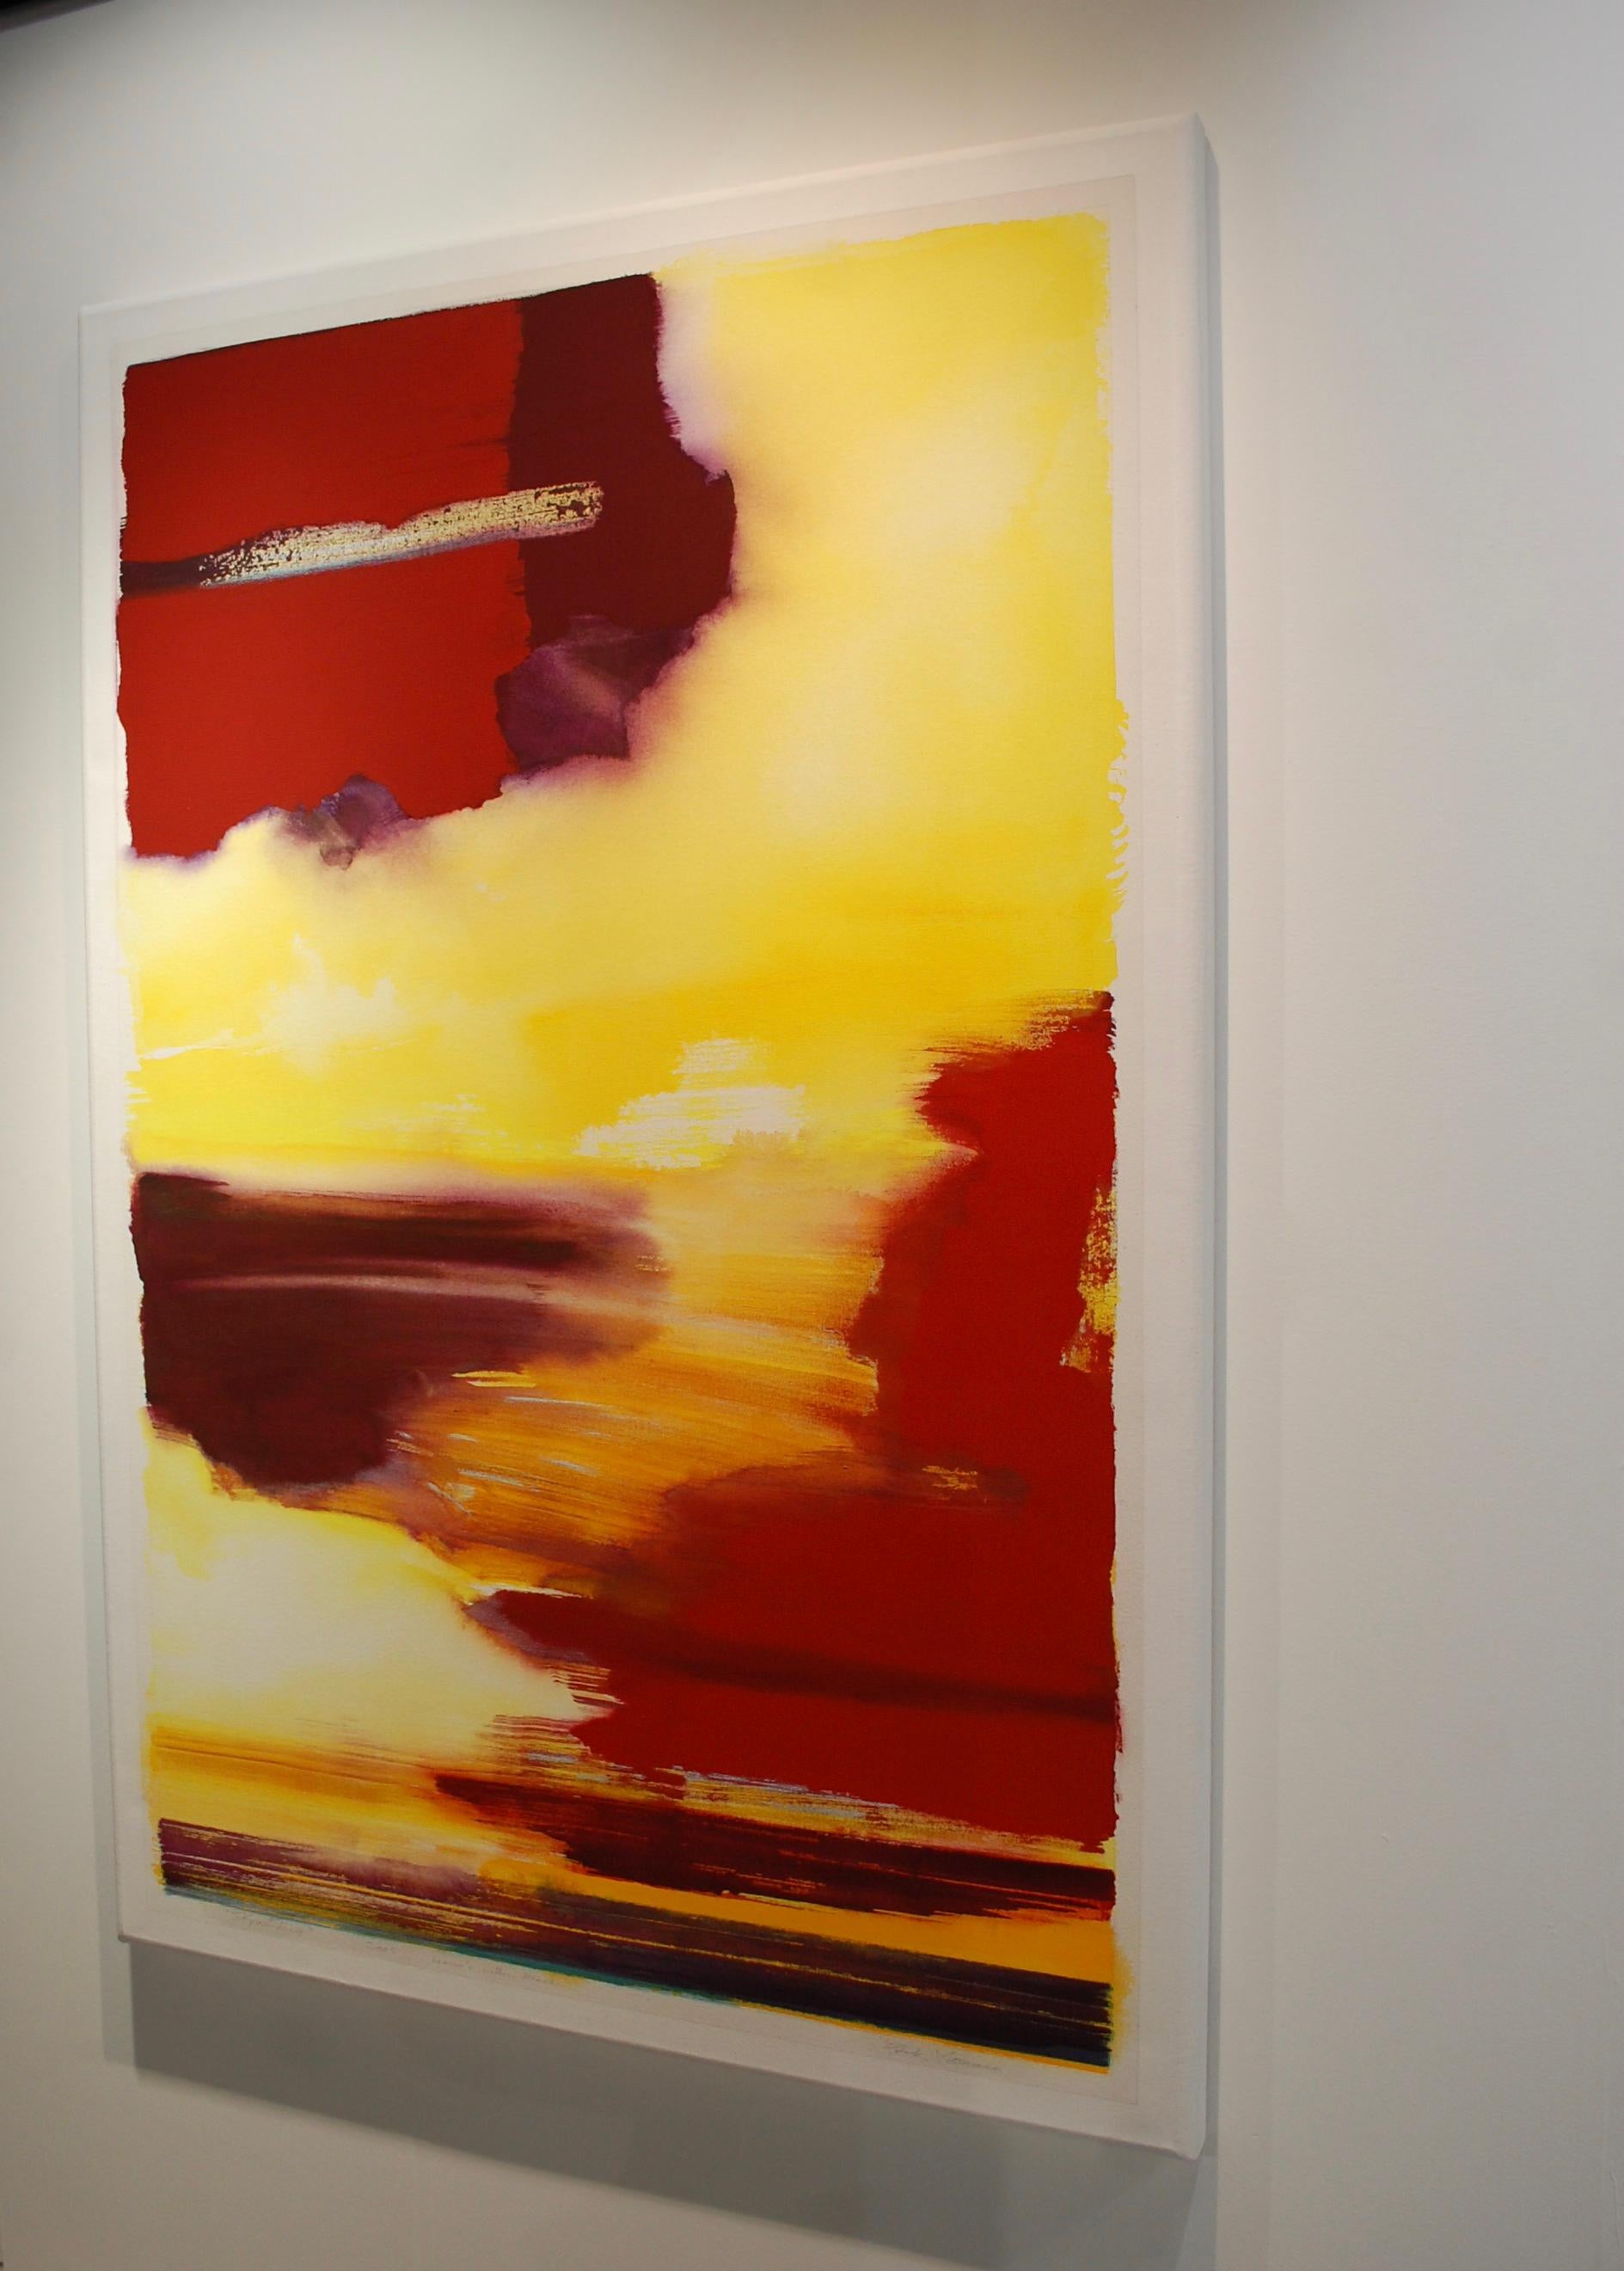 Sunset View Large Yellow Red Abstract Painting
Gallery wrap,  artist signed and titled.  Can be hang vertical or horizontal.
Frank Monaco.
Studied and worked with Marilyn Stiles of The Art Institute of Chicago/ Art History
Painting, Museum